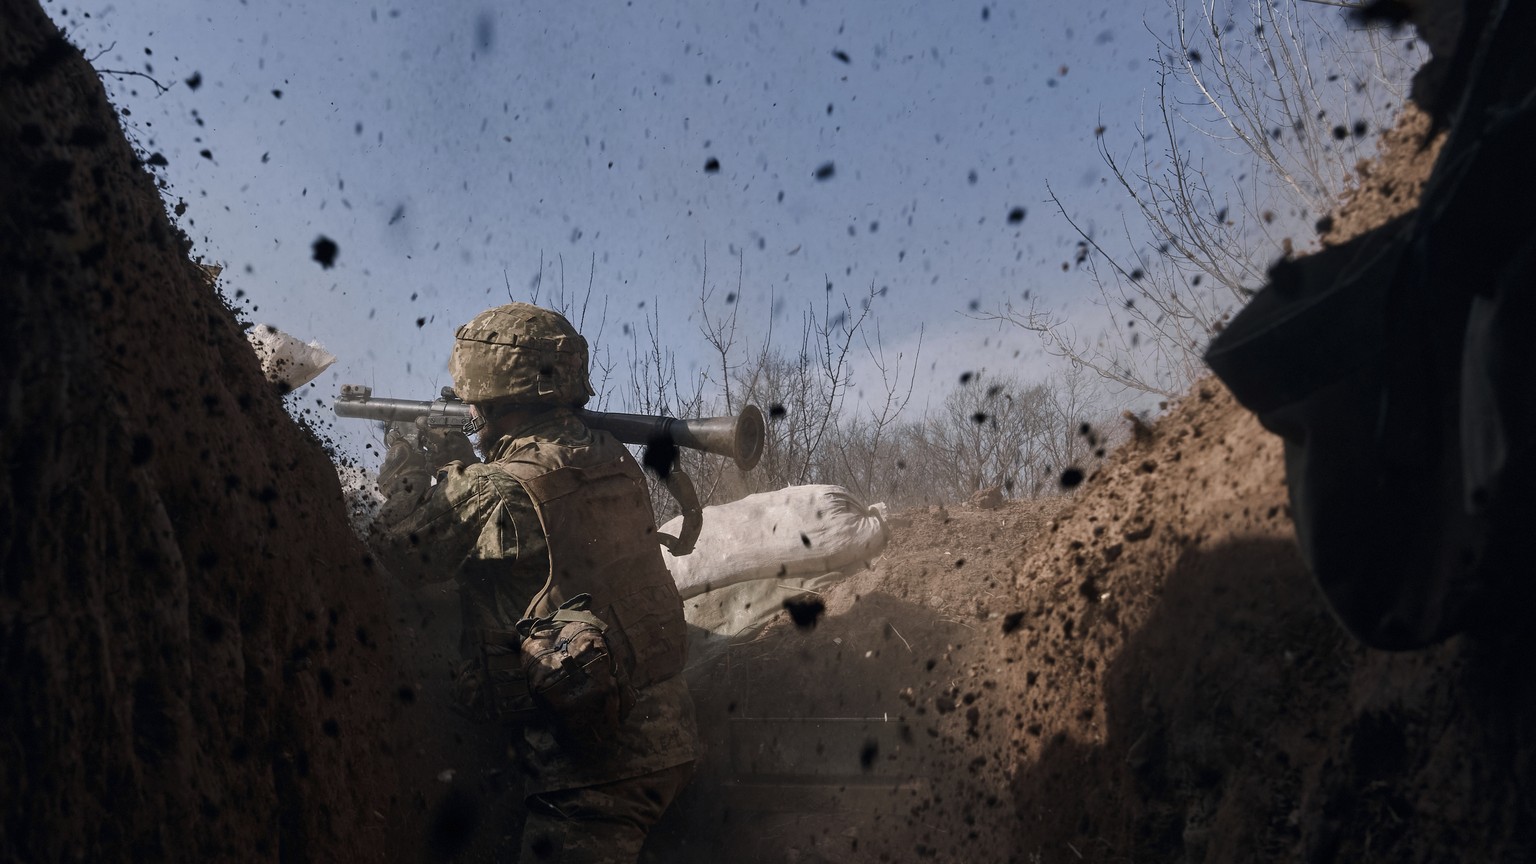 A Ukrainian soldier of the 28th brigade fires a grenade launcher on the frontline during a battle with Russian troops near Bakhmut, Donetsk region, Ukraine, Friday, March 24, 2023. (AP Photo/Libkos)